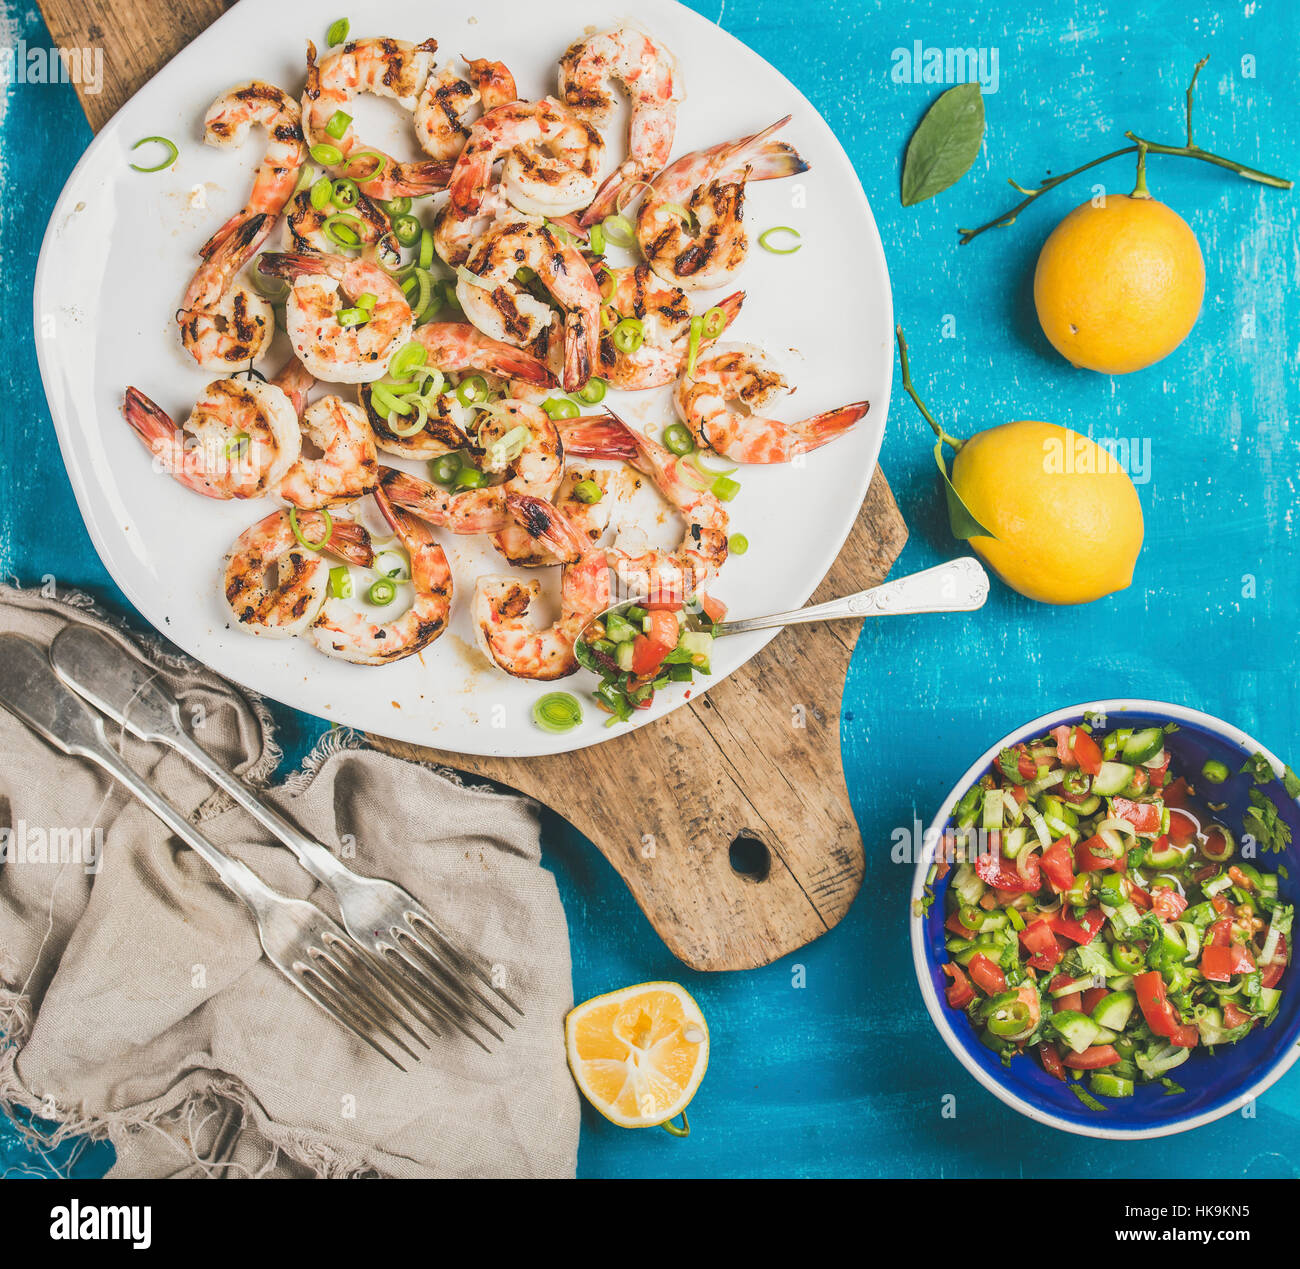 Seafood dinner. Grilled tiger prawns in white plate with lemon, leek, chili pepper and mint salsa sauce on wooden board over bright blue background, t Stock Photo